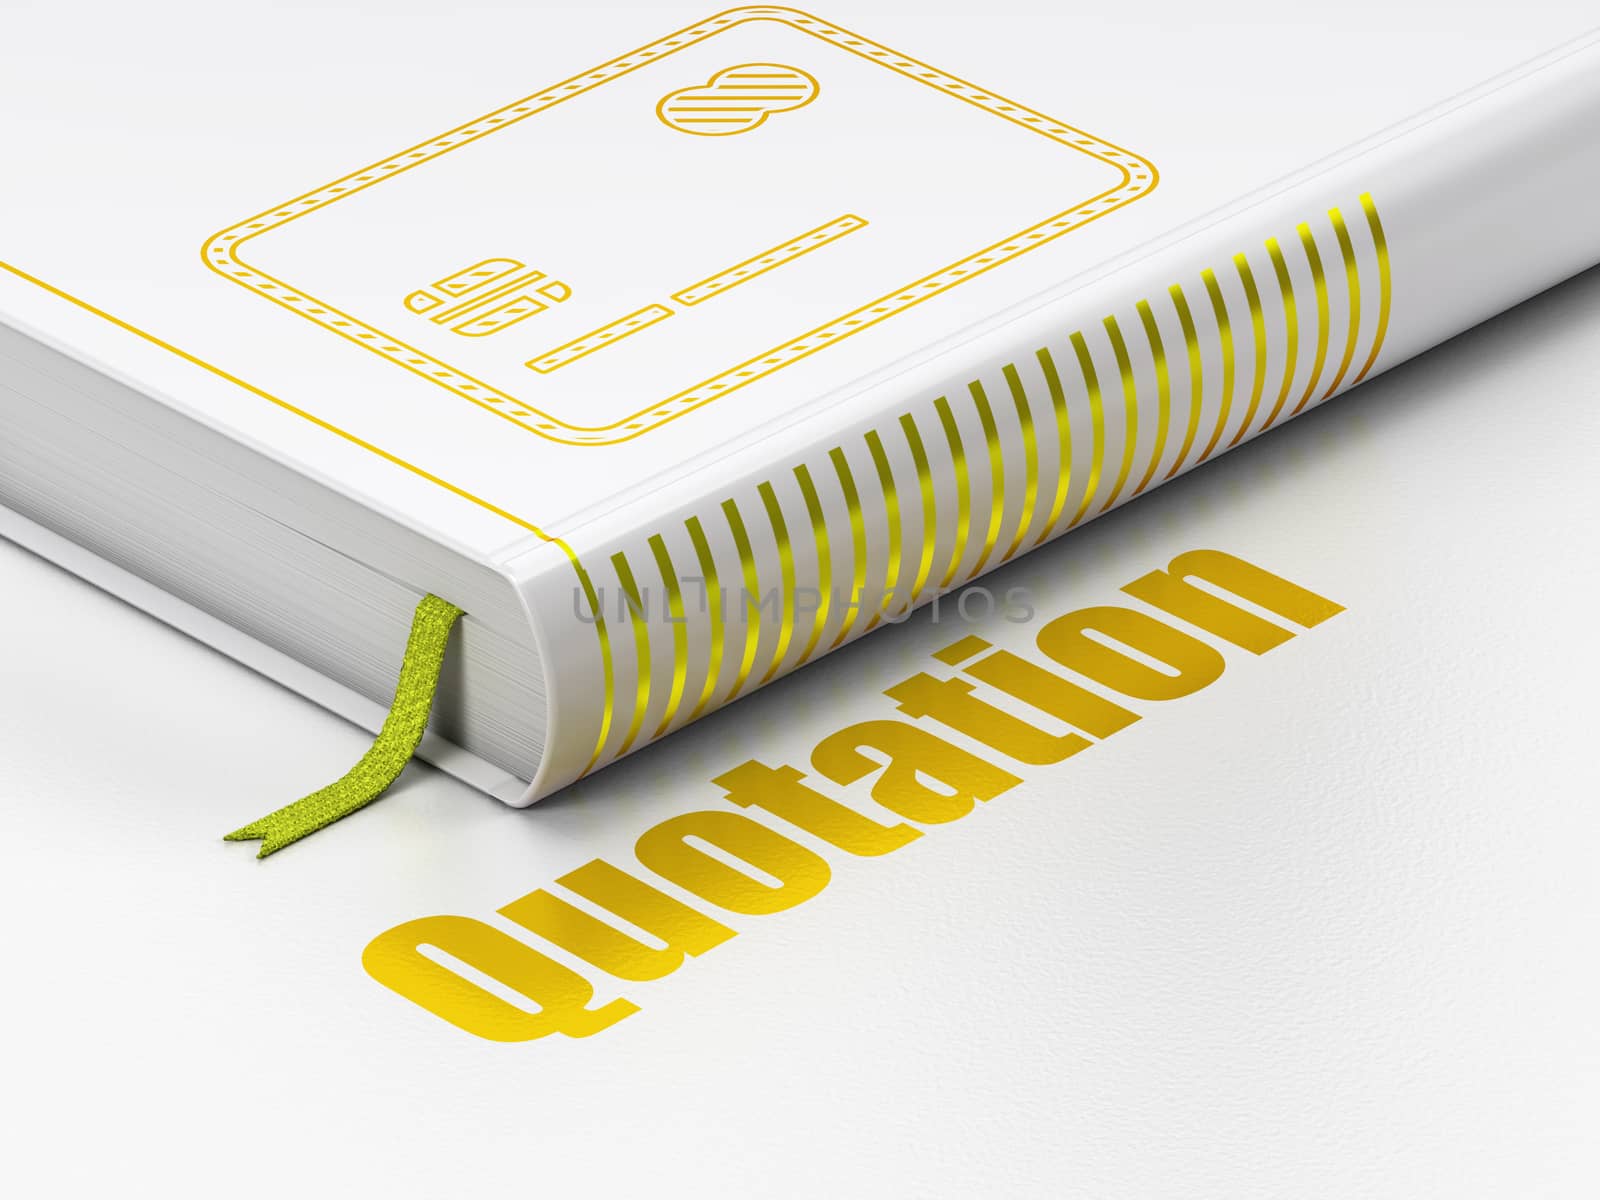 Money concept: closed book with Gold Credit Card icon and text Quotation on floor, white background, 3D rendering